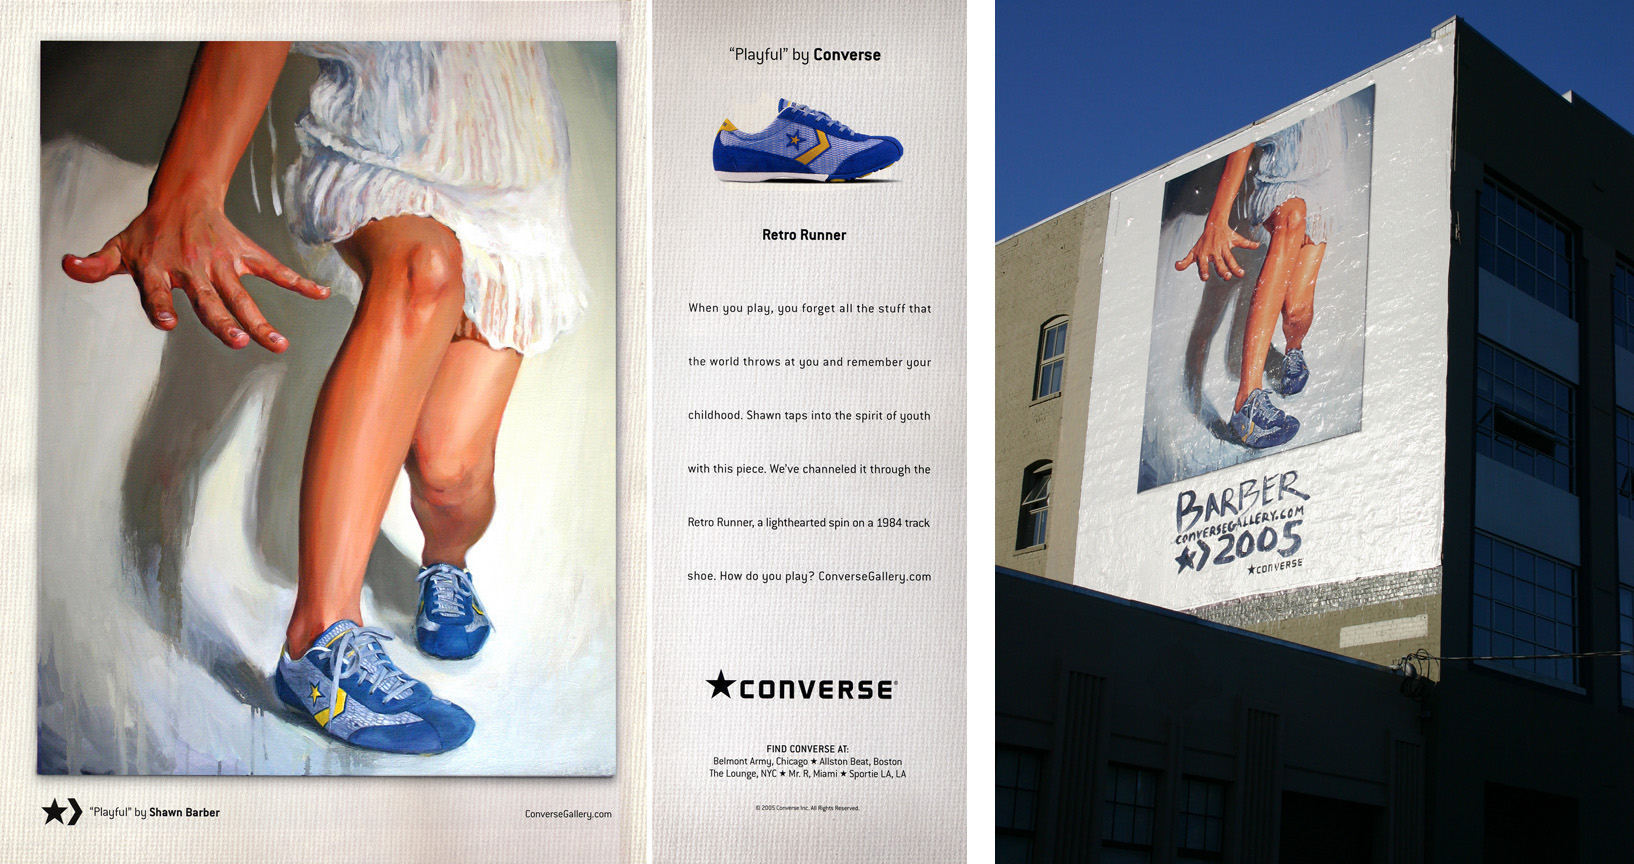 Artist Series, Ad campaign for Converse / Billboard in downtown, San Francisco, 2005